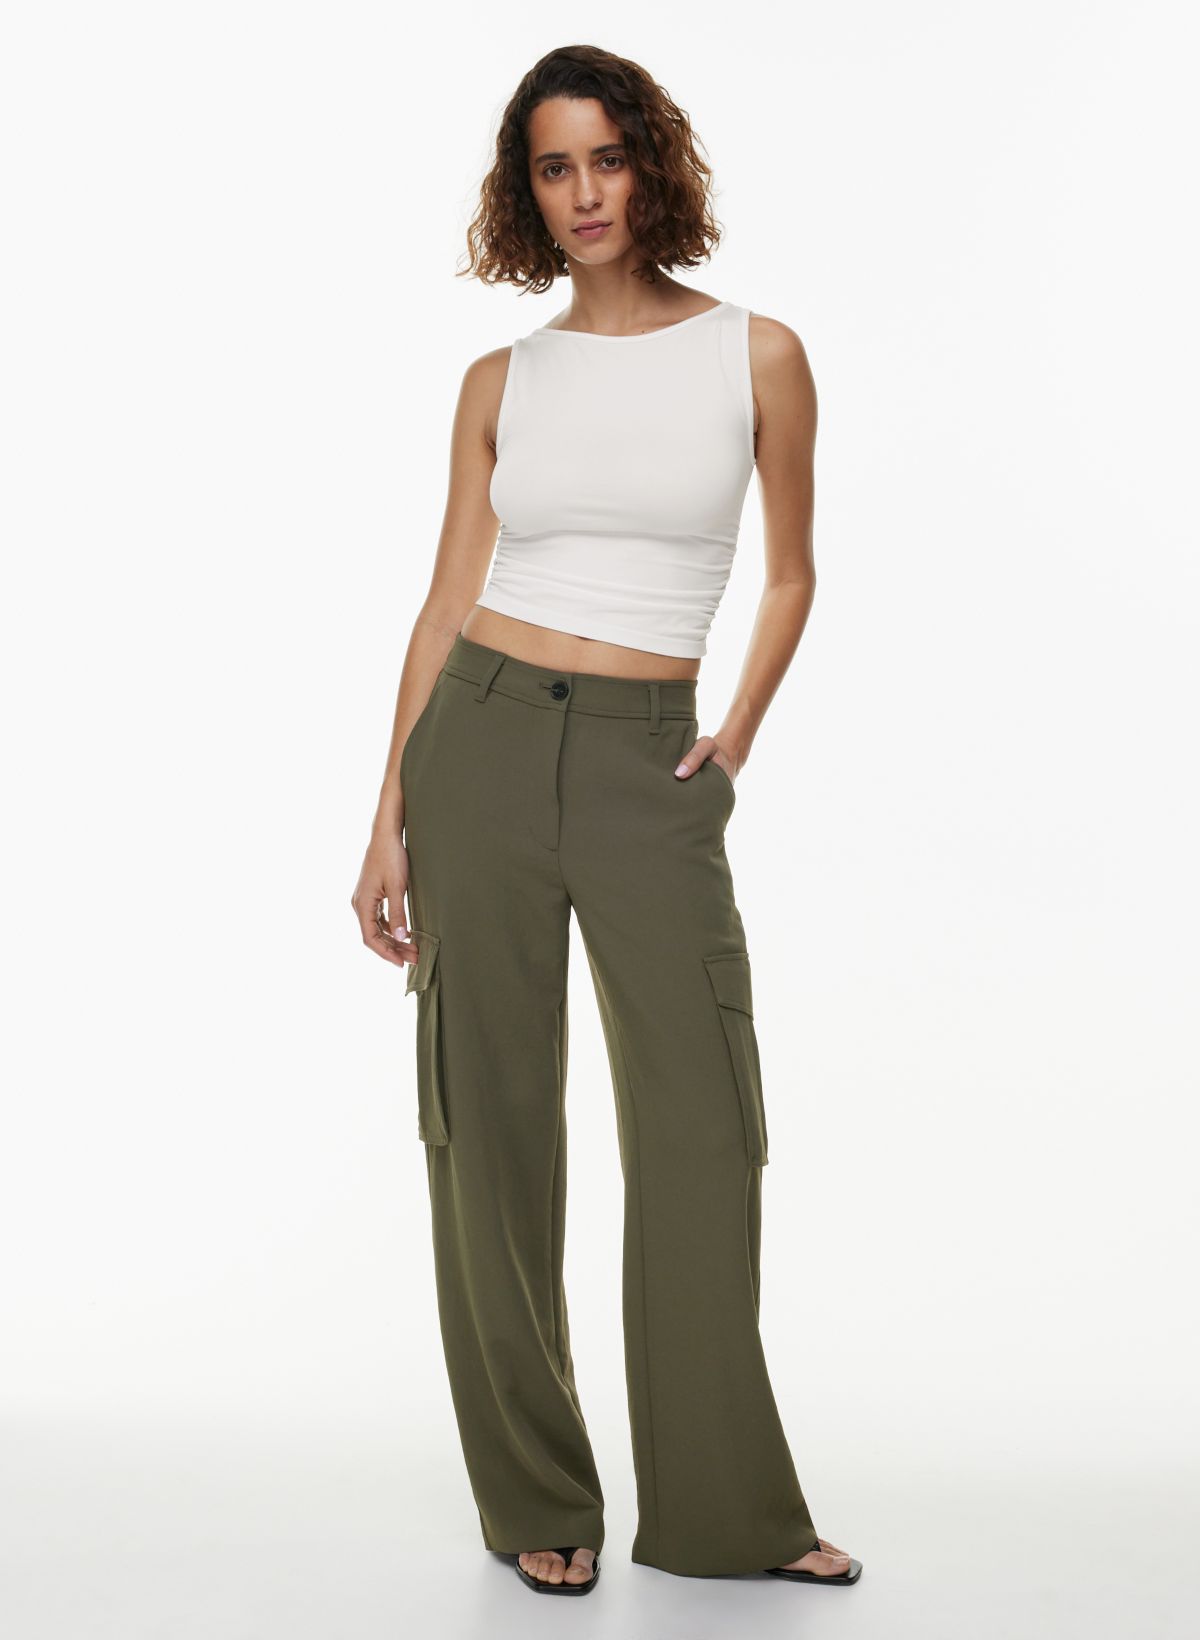 Buy ALAXENDER PRESENT Casual Palazzo Pants for Women Lounge Pants